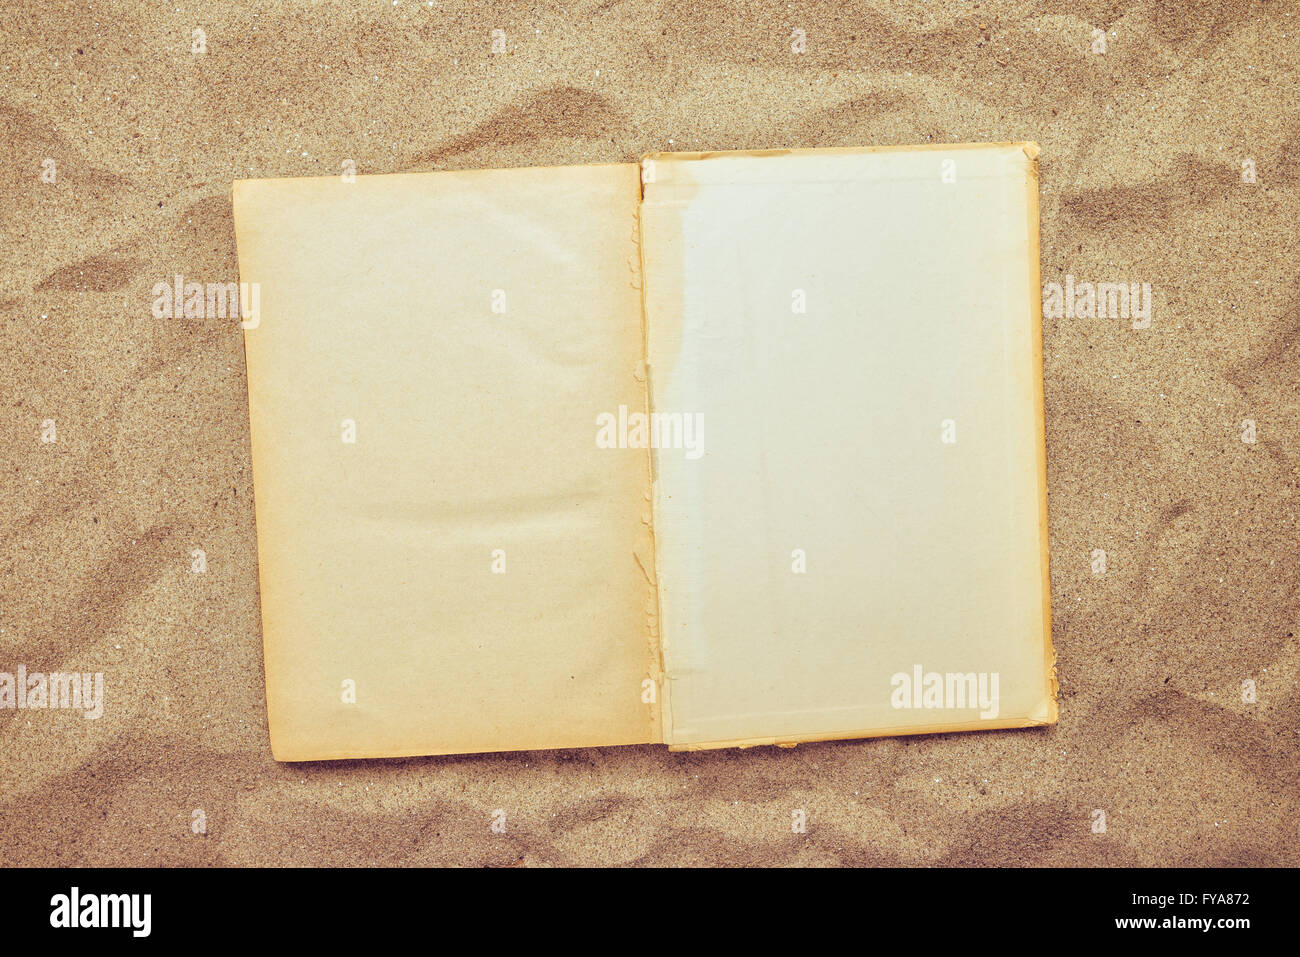 Topdown View Open Journal Blank Pages Stock Photo 1077095003